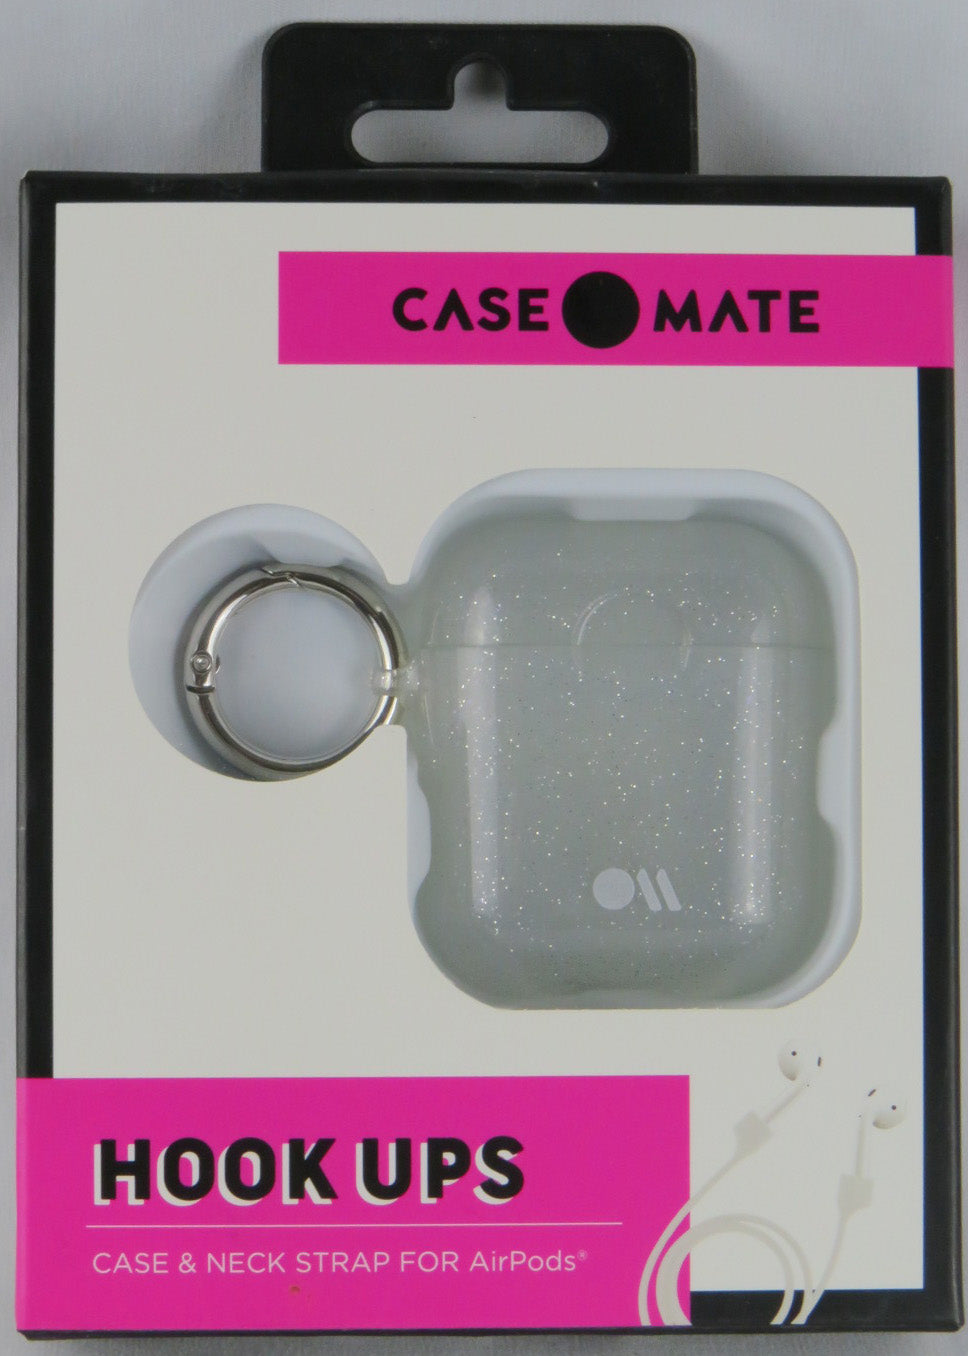 Case Mate Hookups Case & Neck Strap for Airpods Clear